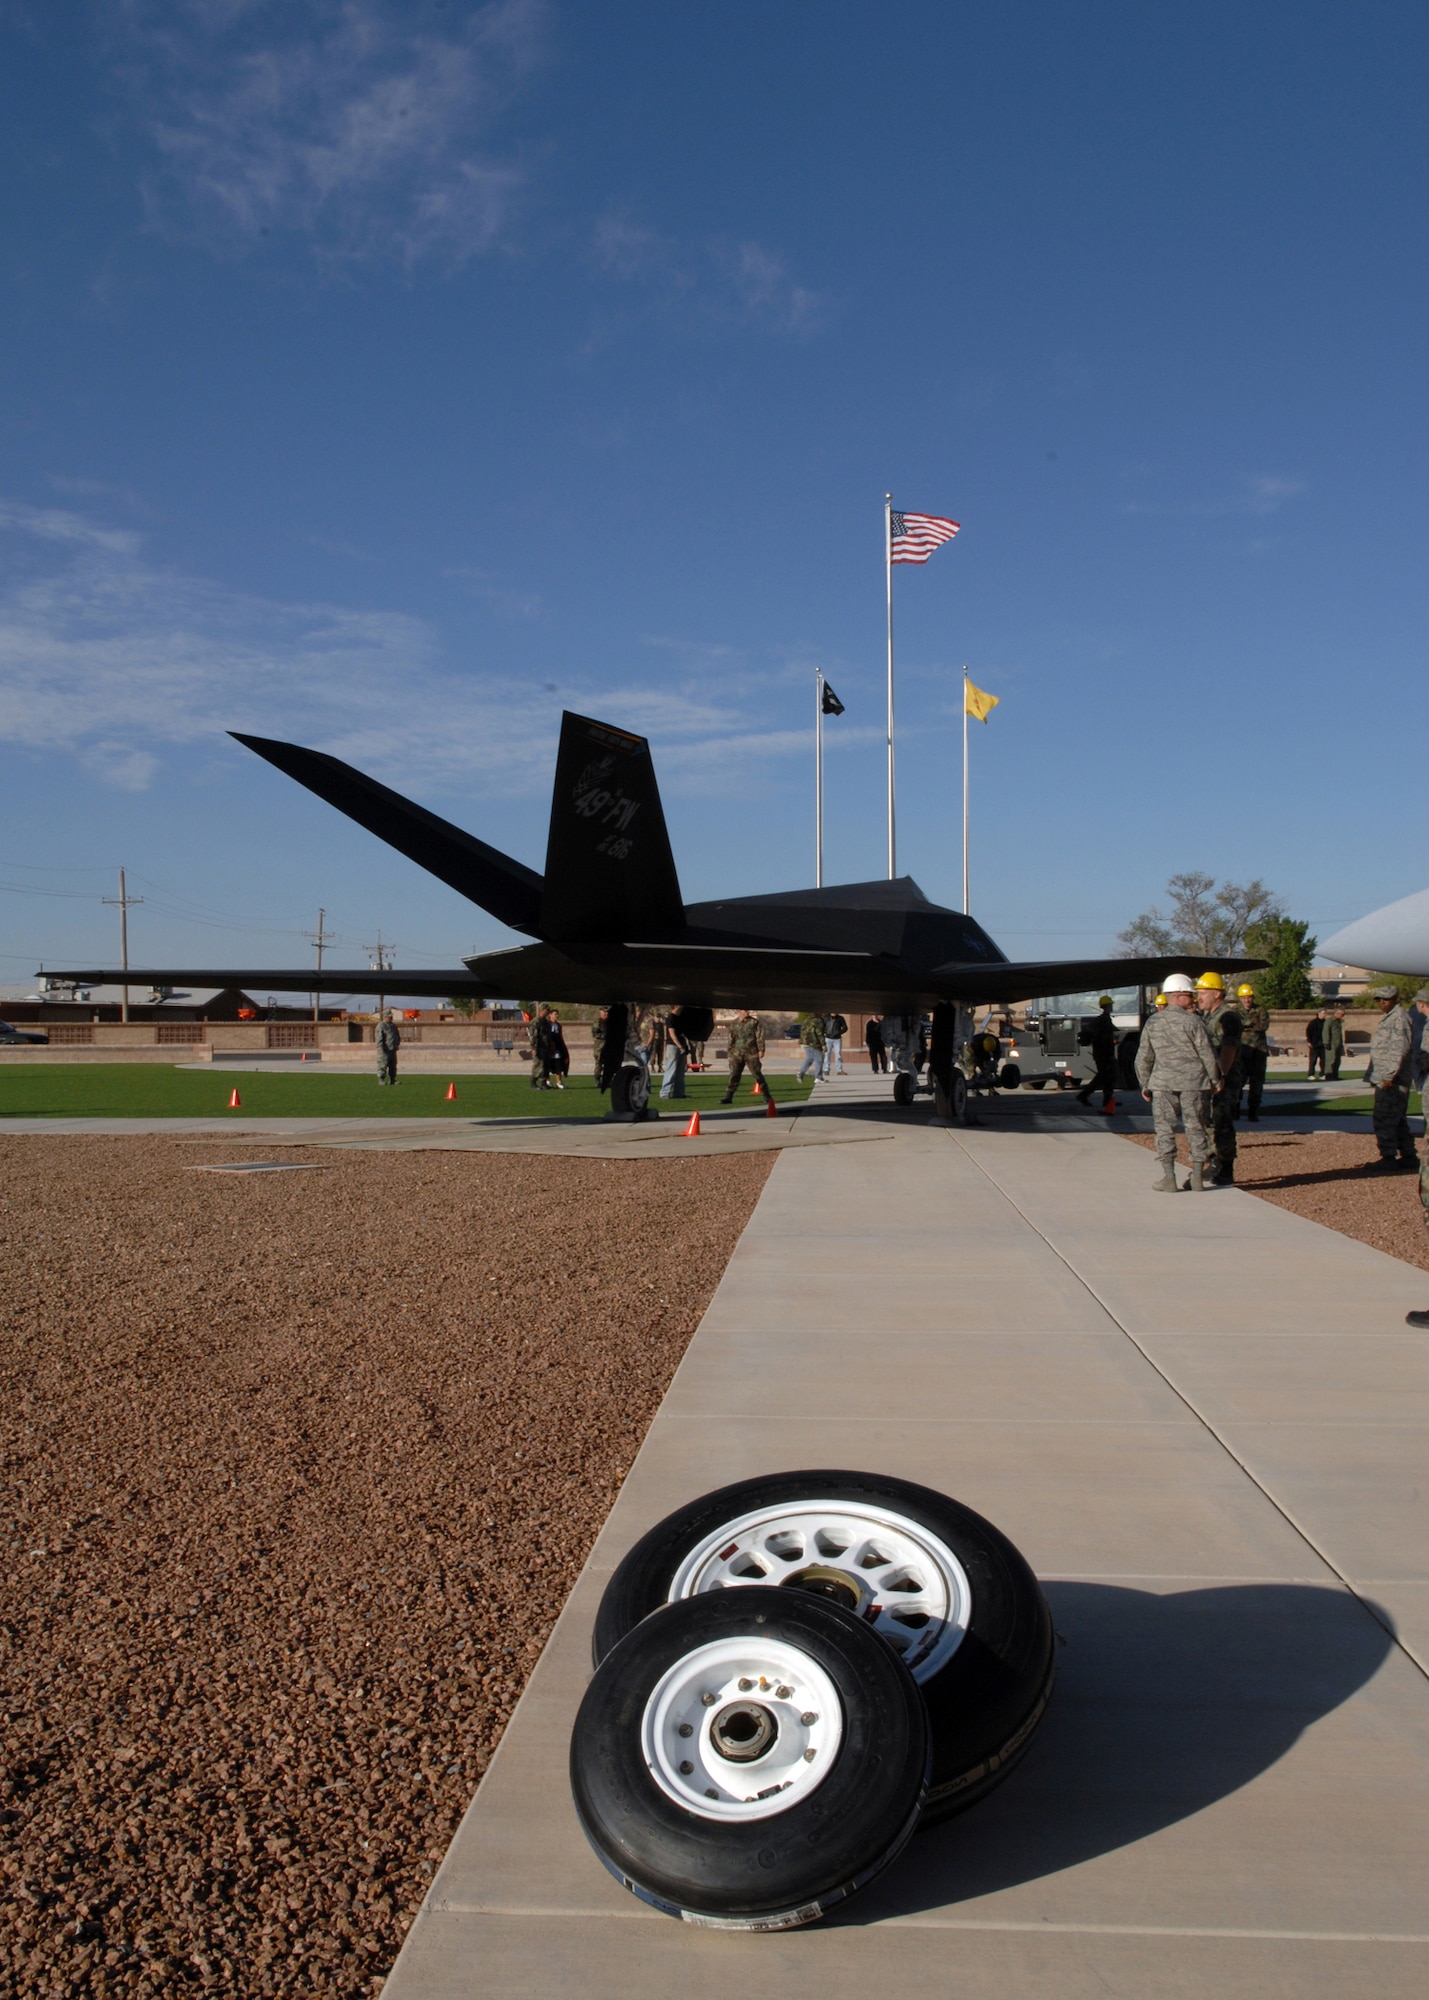 HOLLOMAN AIR FORCE BASE, N.M. -- Due to the upcoming retirement, an F-117A was moved to Heritage Park here, April 5, for all of Team Holloman to see and remember. Once the F-117A was put in its place at Heritage Park here, April 5, these new wheels were put on it, to replace the used ones. (U.S. Air Force photo by Airman Sondra M. Wieseler)